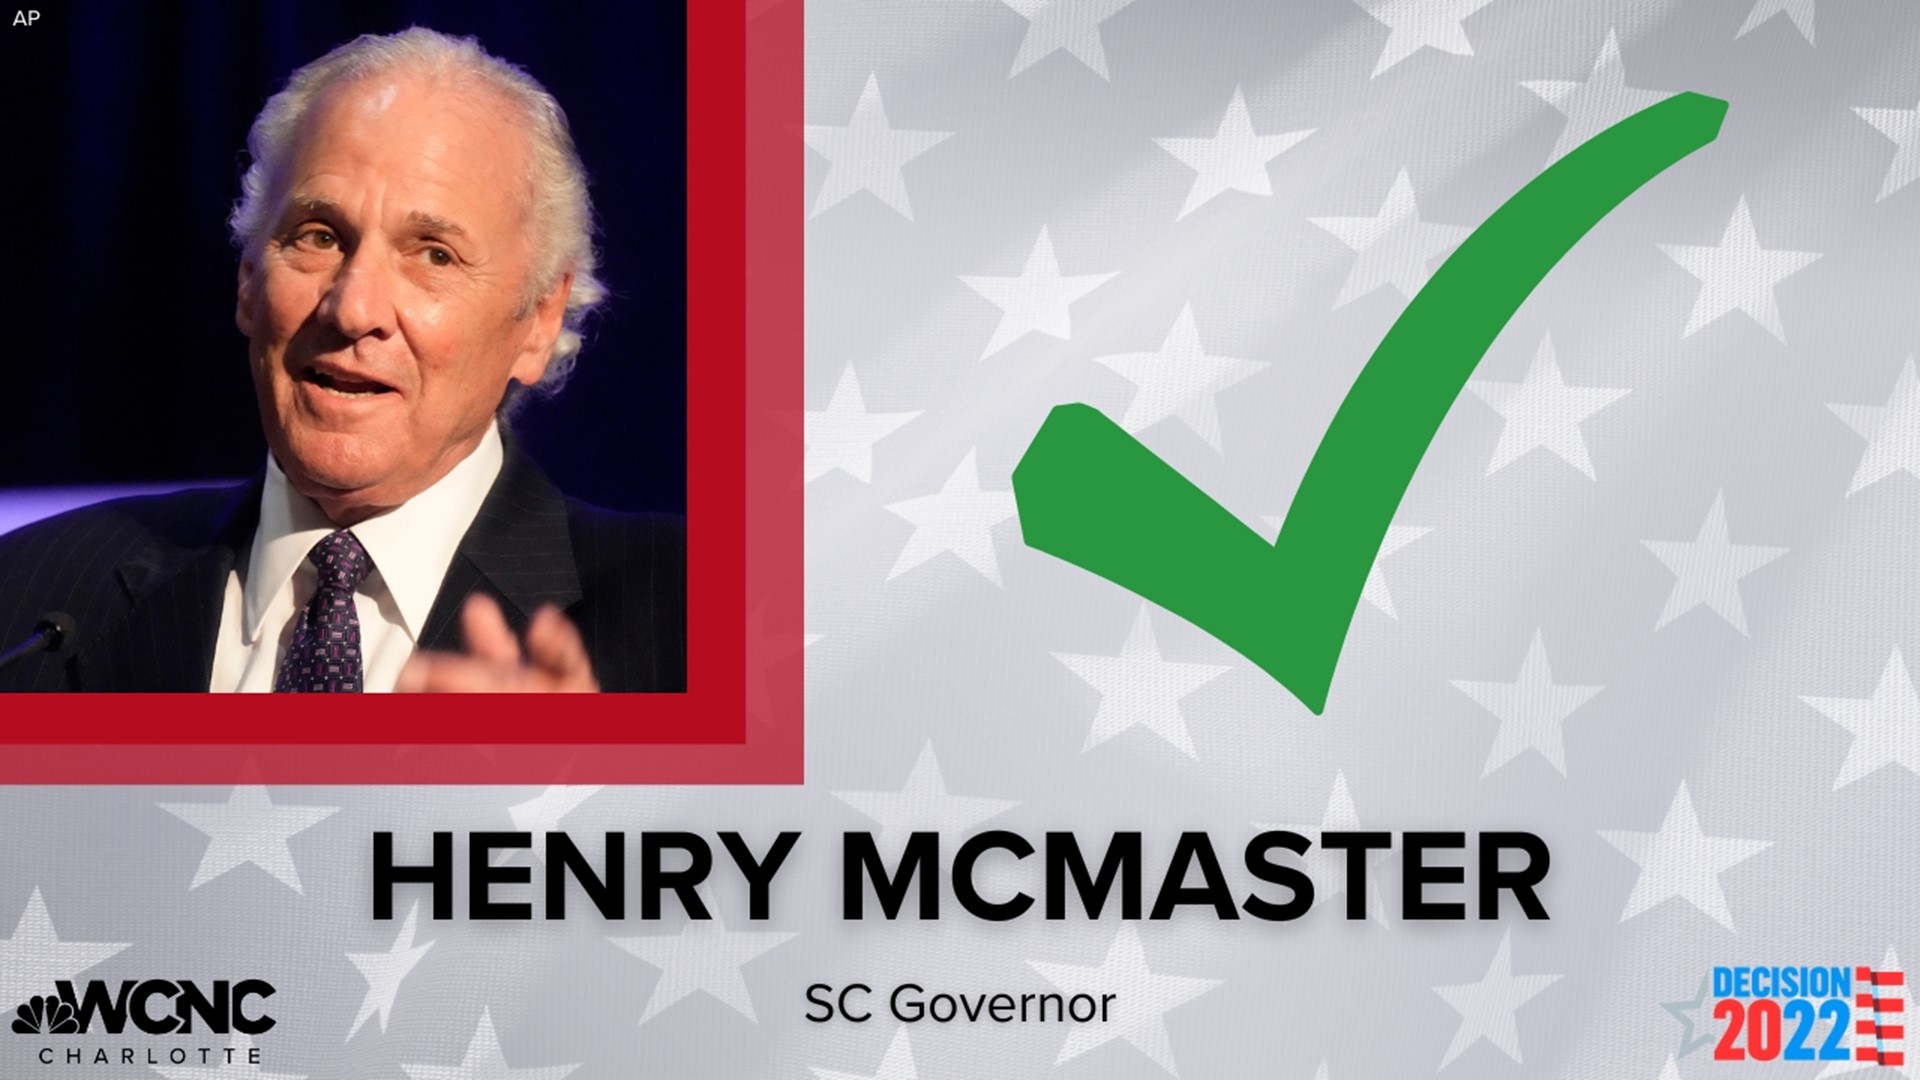 If he completes his second term, McMaster would serve as governor for 10 years, longer than any other executive in the state’s history.